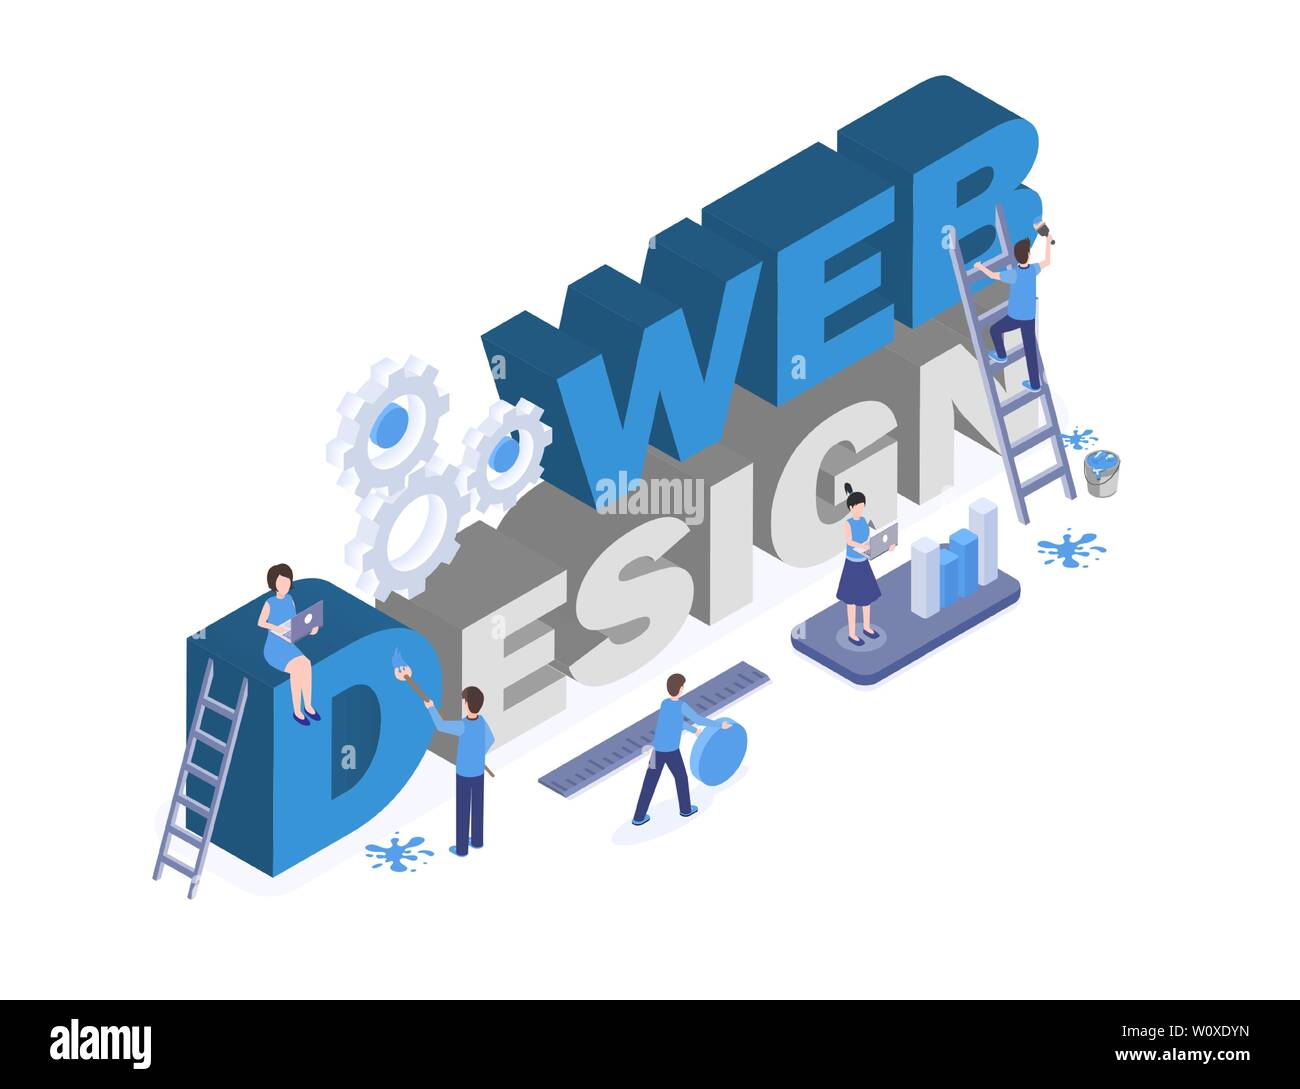 Web Design Banner Vector Template Graphic And Digital Design Studio Workers Teamworking Searching Creative Solutions 3d Characters Mobile App Interface Development Market Analysis Illustration Stock Vector Image Art Alamy